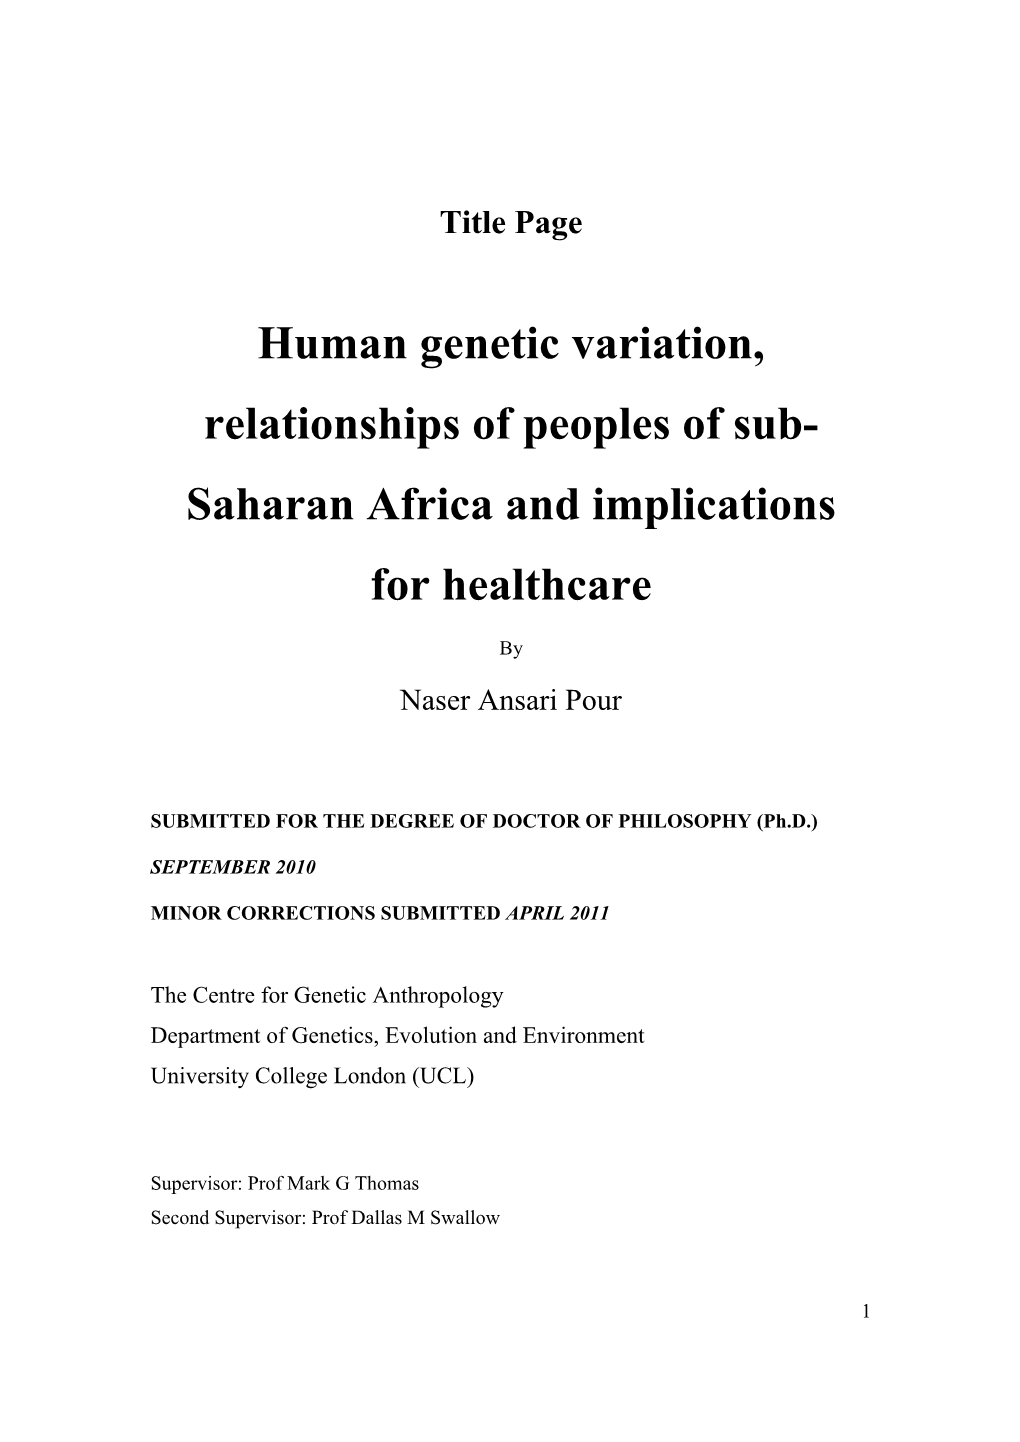 Human Genetic Variation, Relationships of Peoples of Sub- Saharan Africa and Implications for Healthcare